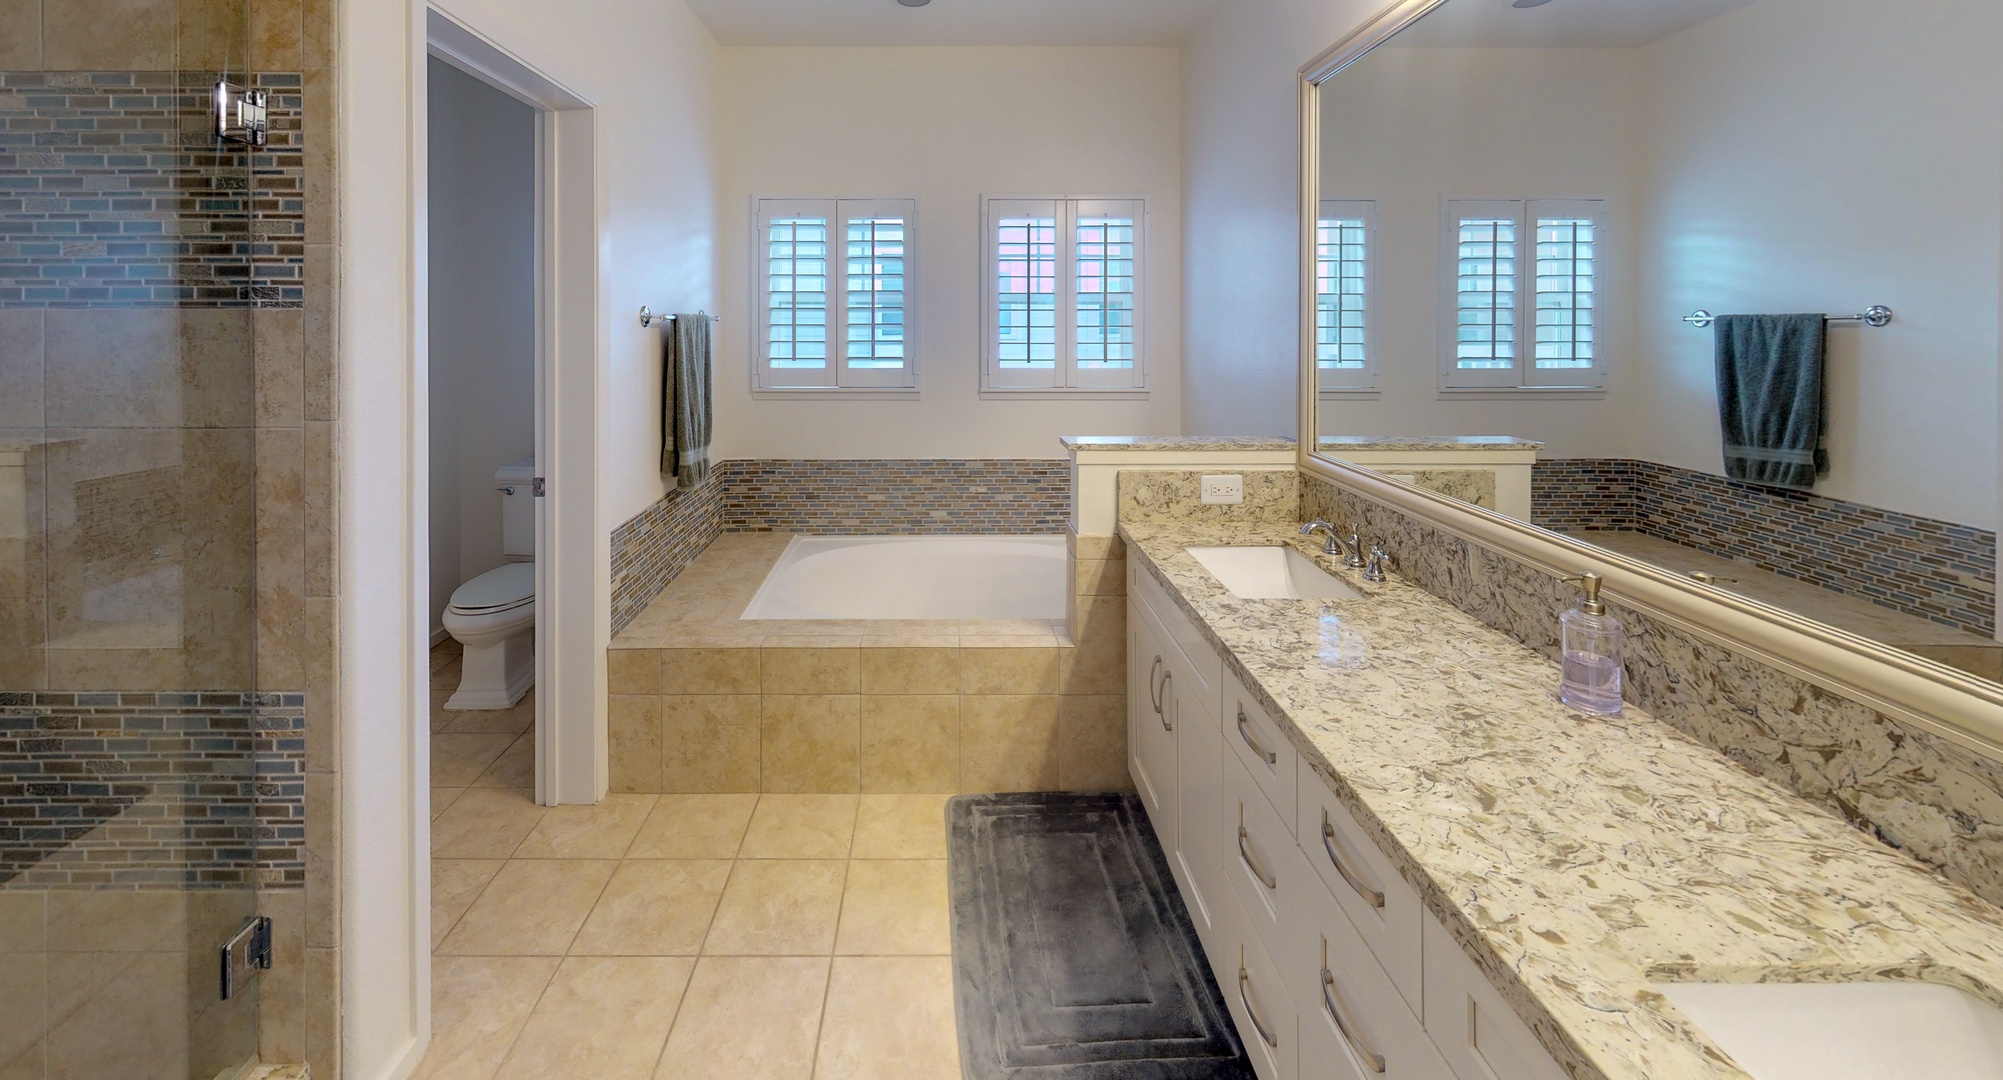 Kapolei Vacation Rentals, Coconut Plantation 1158-1 - The spacious primary guest bathroom with a luxurious soaking tub.